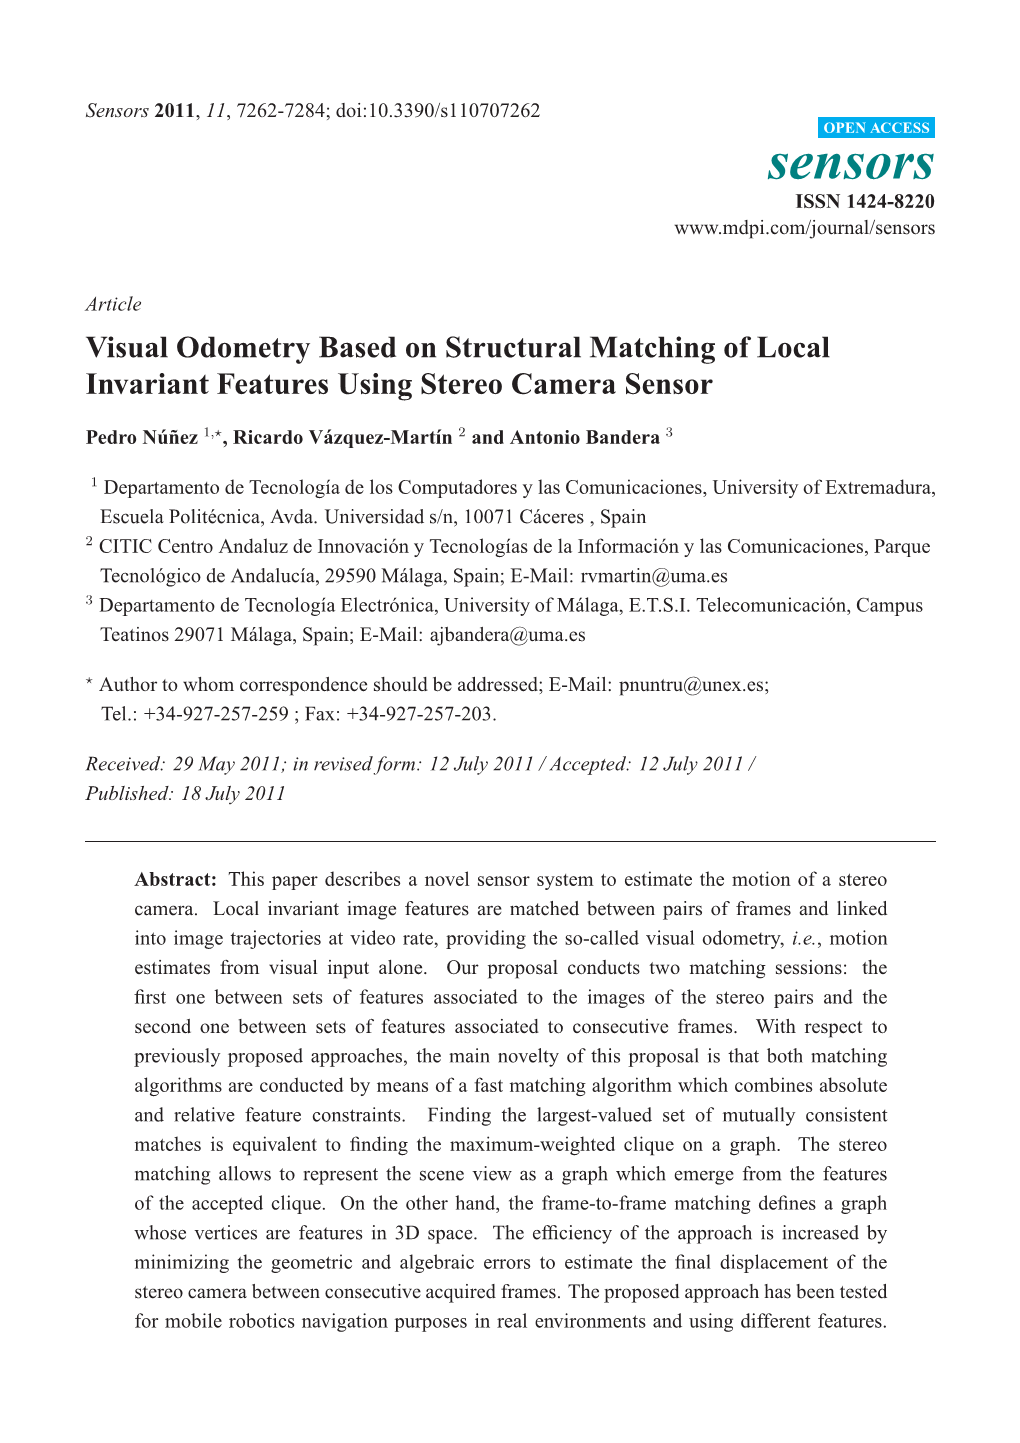 Visual Odometry Based on Structural Matching of Local Invariant Features Using Stereo Camera Sensor